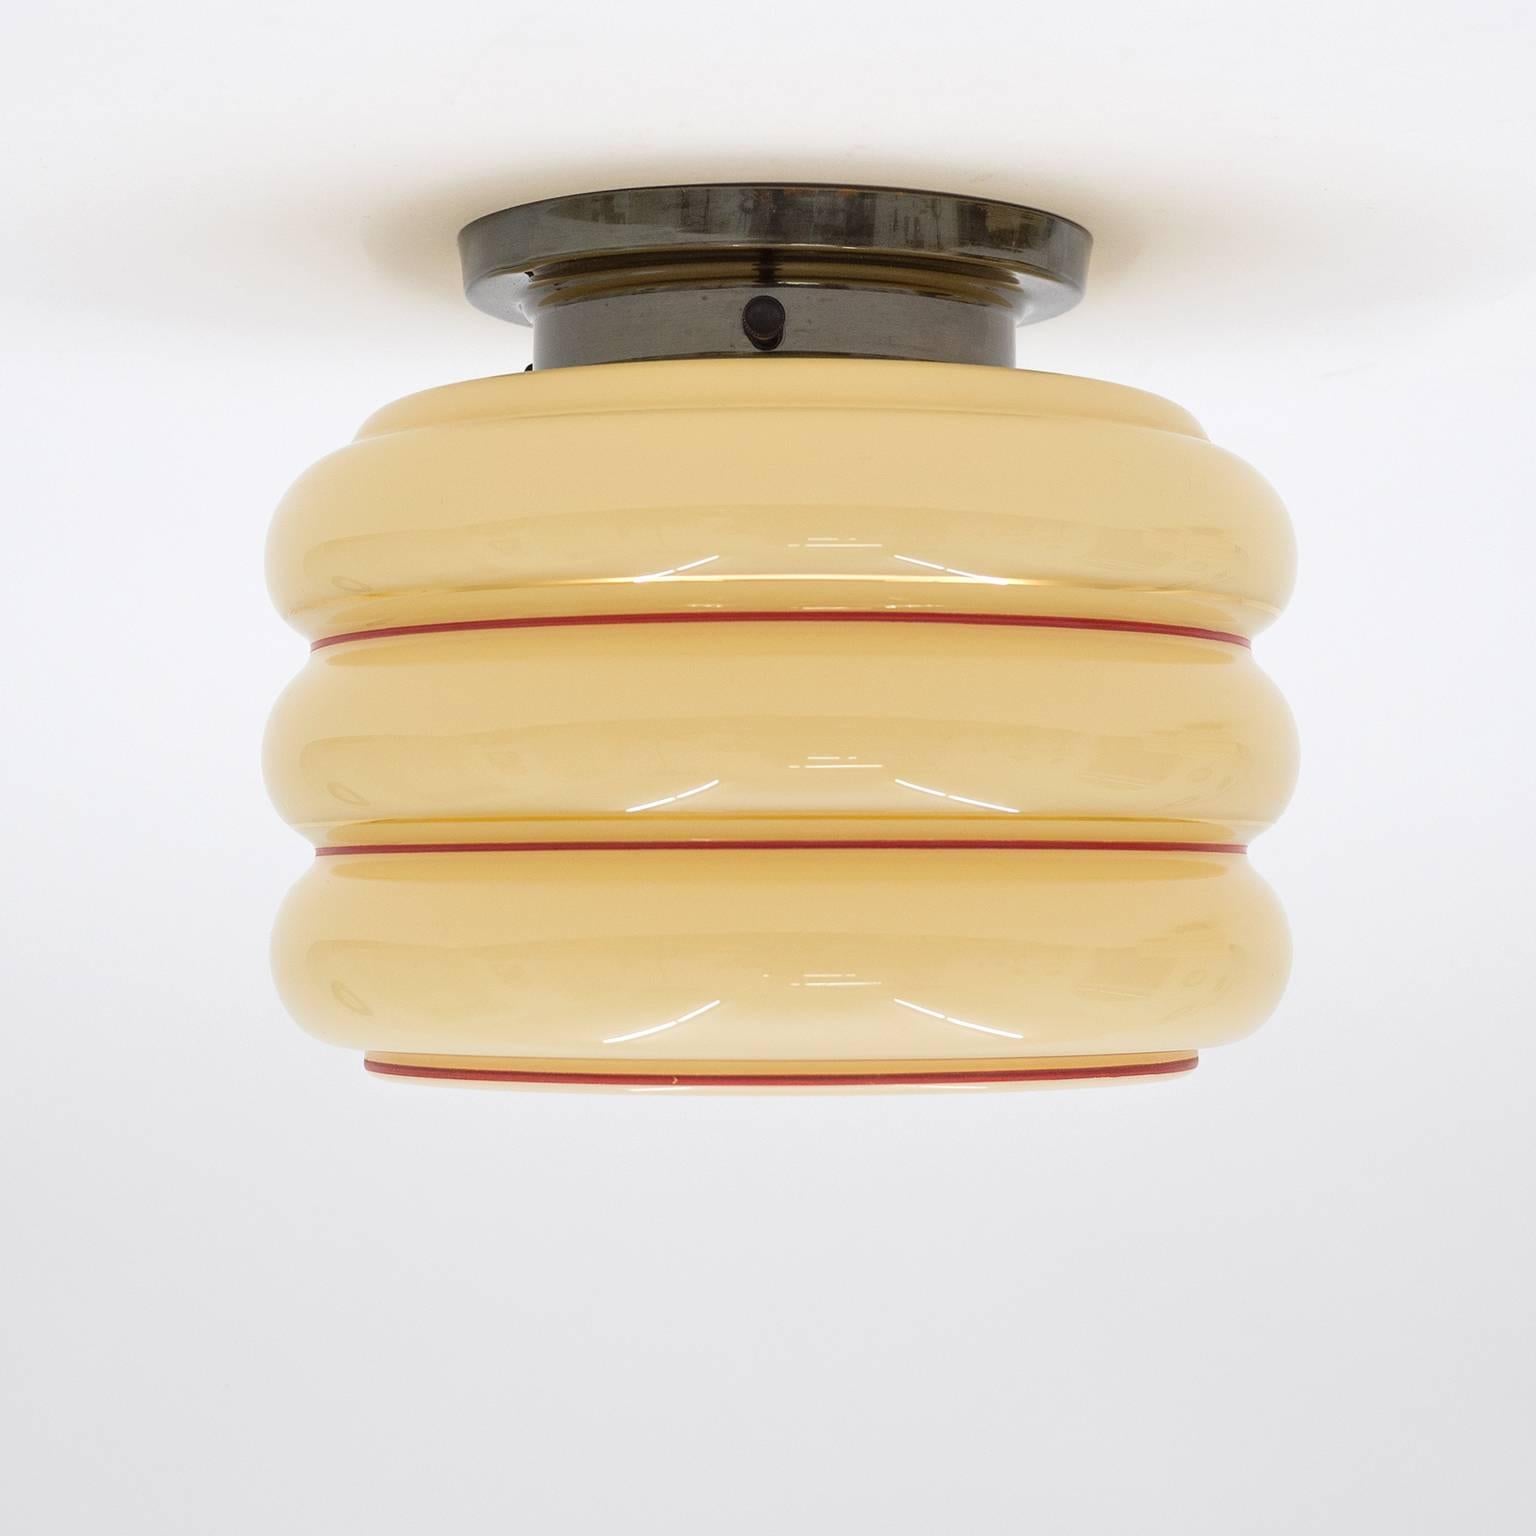 Lovely Art Deco flush mount from Sweden, 1940s. The blown glass is cased in a cream color with red and gold rings painted to the outside. The base is patinated brass and has one original brass E27 socket. Beautiful original condition with minor wear